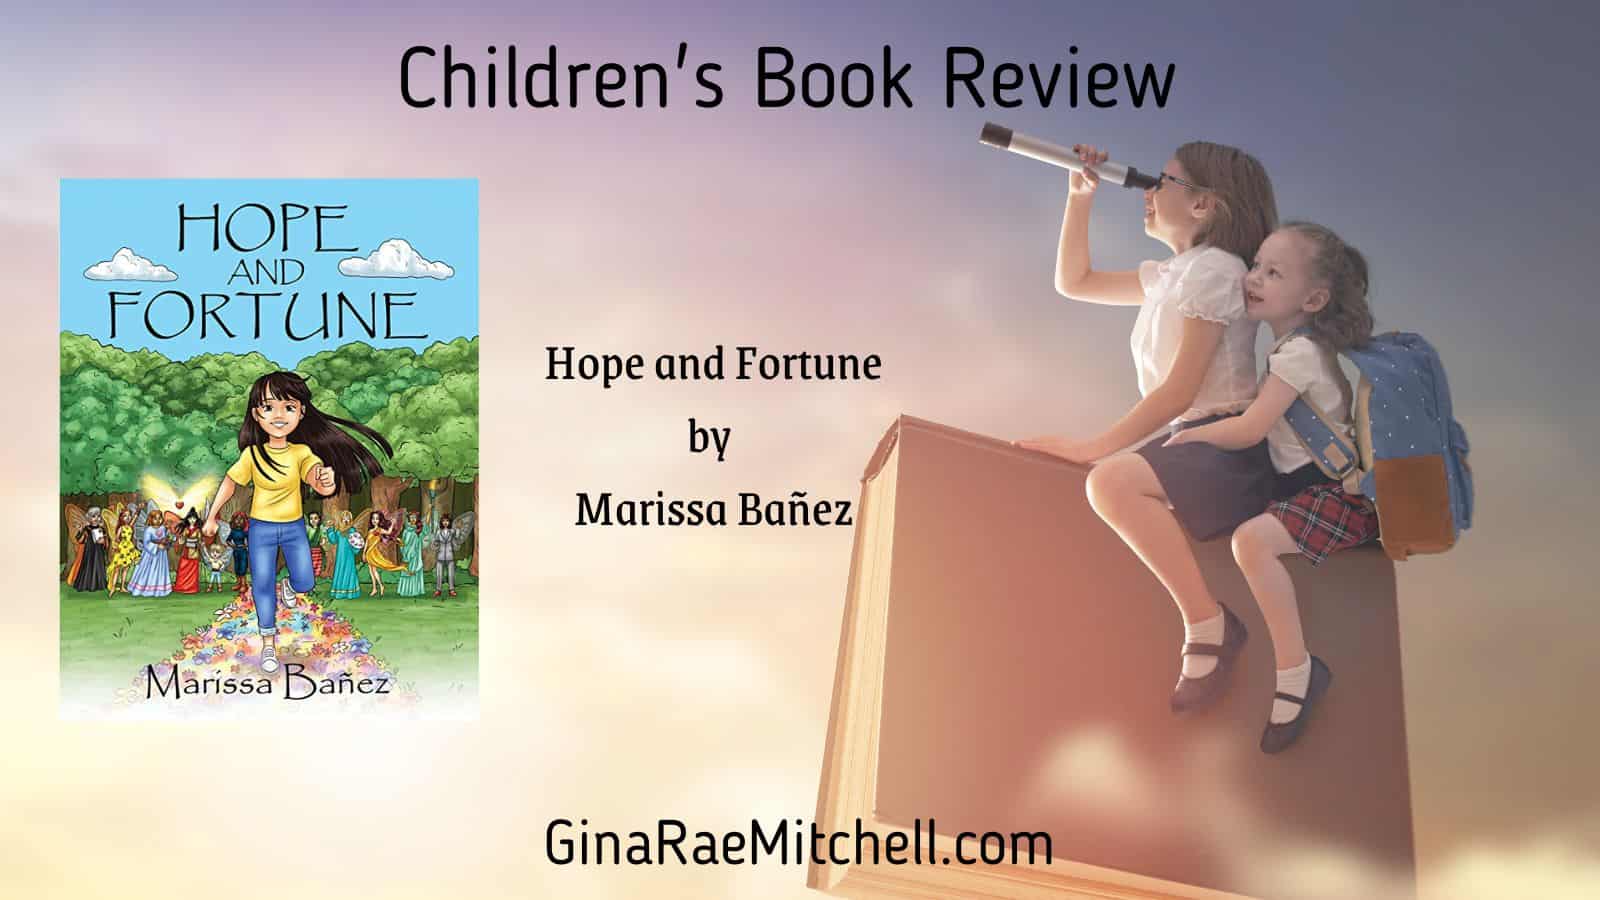 Review: Hope and Fortune by Marissa Bañez | Children's Book for all ages! | 12 Fairies teach Self-Esteem